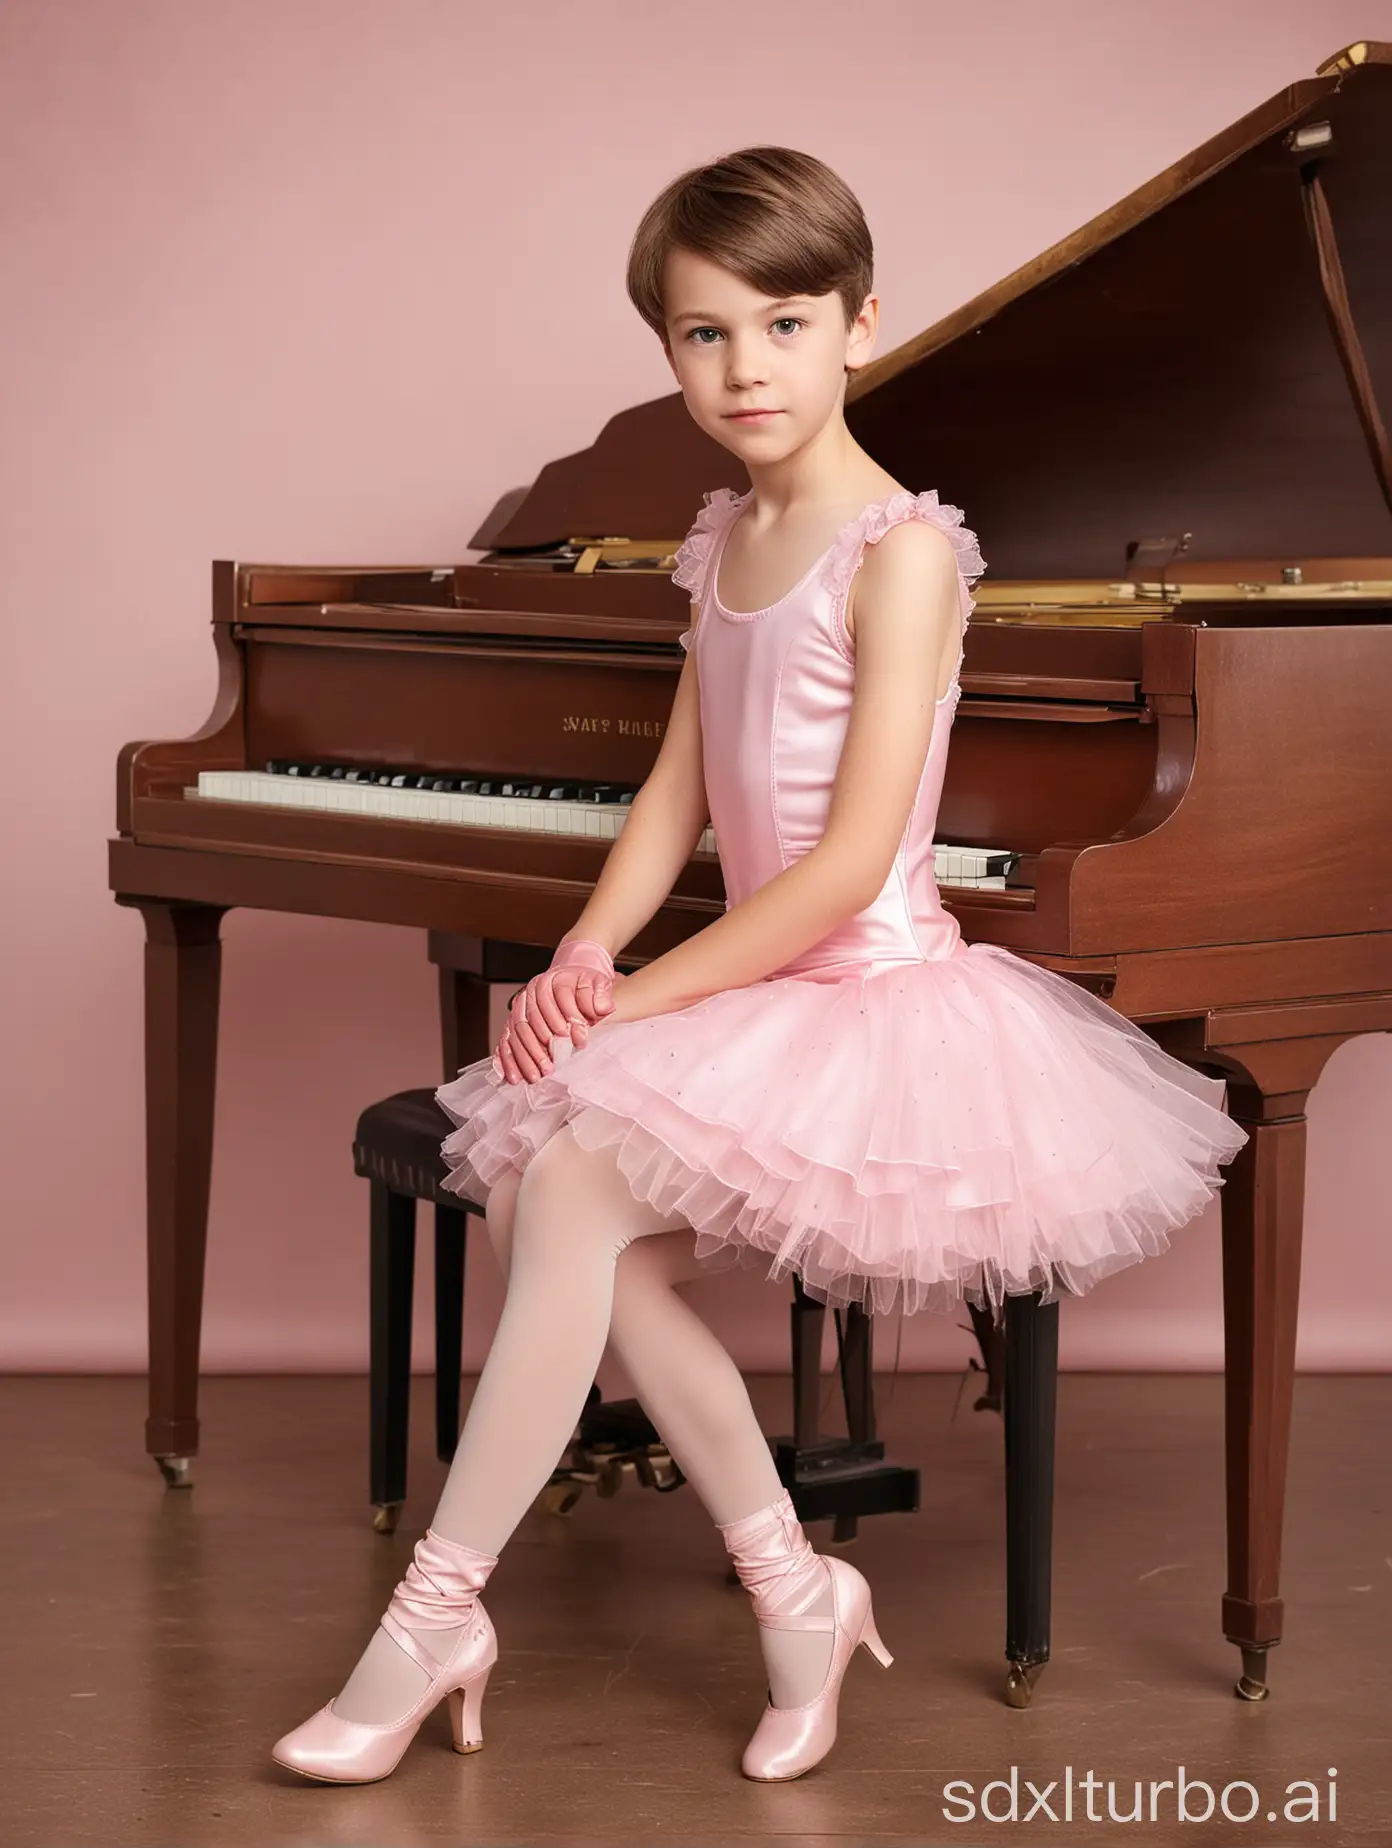 Digital photography of a nervously cute 11-year-old boy, forced to sit in a pink ballet dress with high heel boots and leather gloves and play the piano, a white boy, with a cute face (gender role reversal)